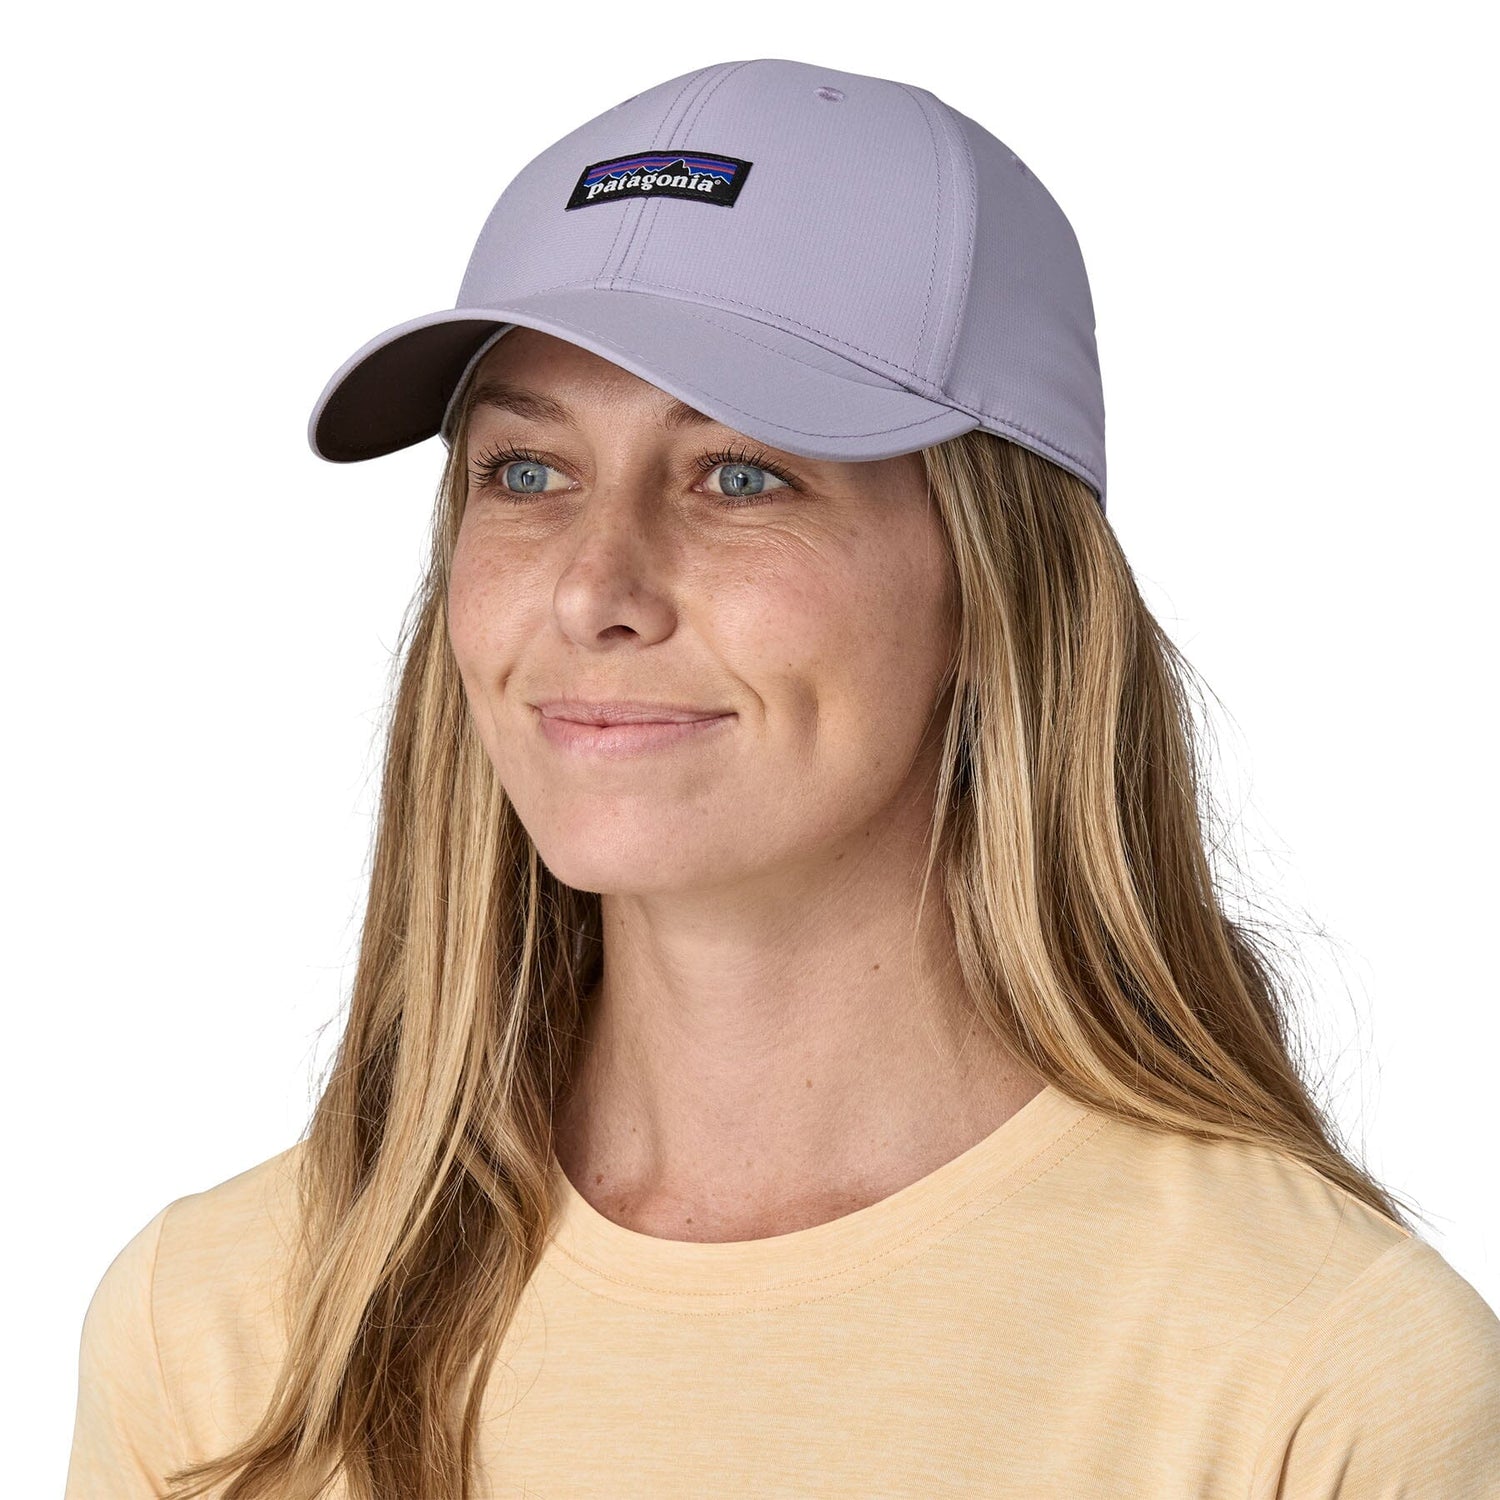 Patagonia - Airshed Cap - 100% Recycled Polyester & NetPlus® - Weekendbee - sustainable sportswear